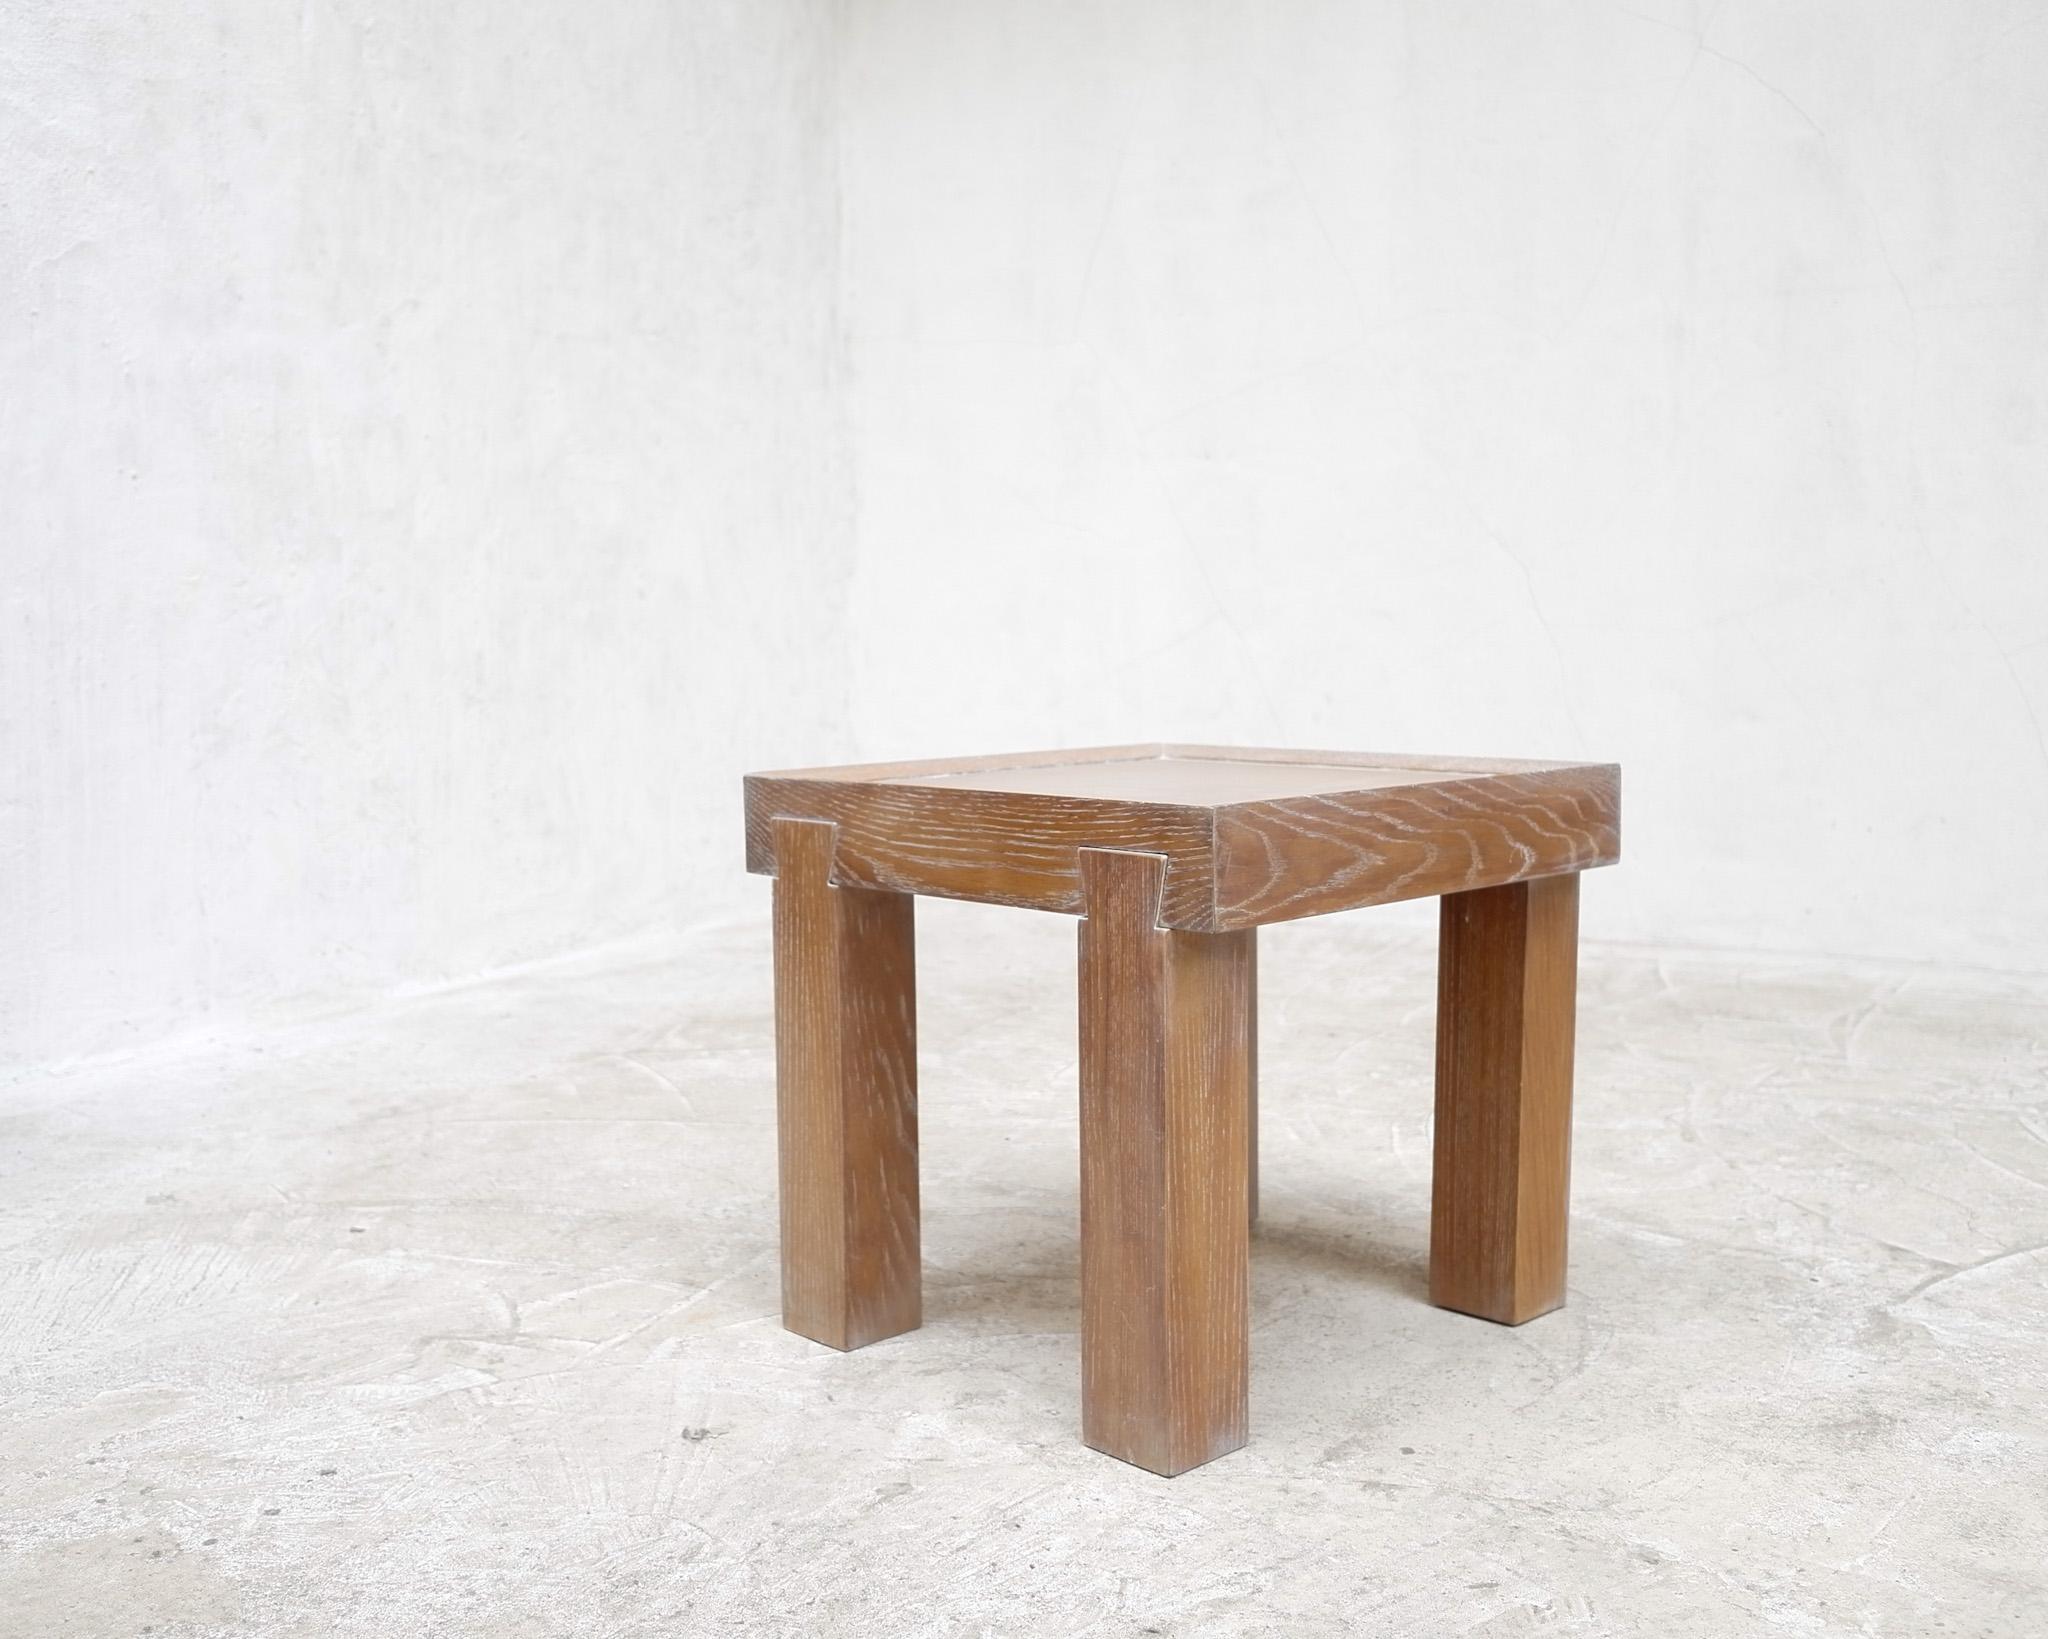 A small French deco/modernist side table in limed oak.

Unusual emphasised dovetail jointed legs.

-

We offer free shipping to the USA/Canada through Fedex with this item.